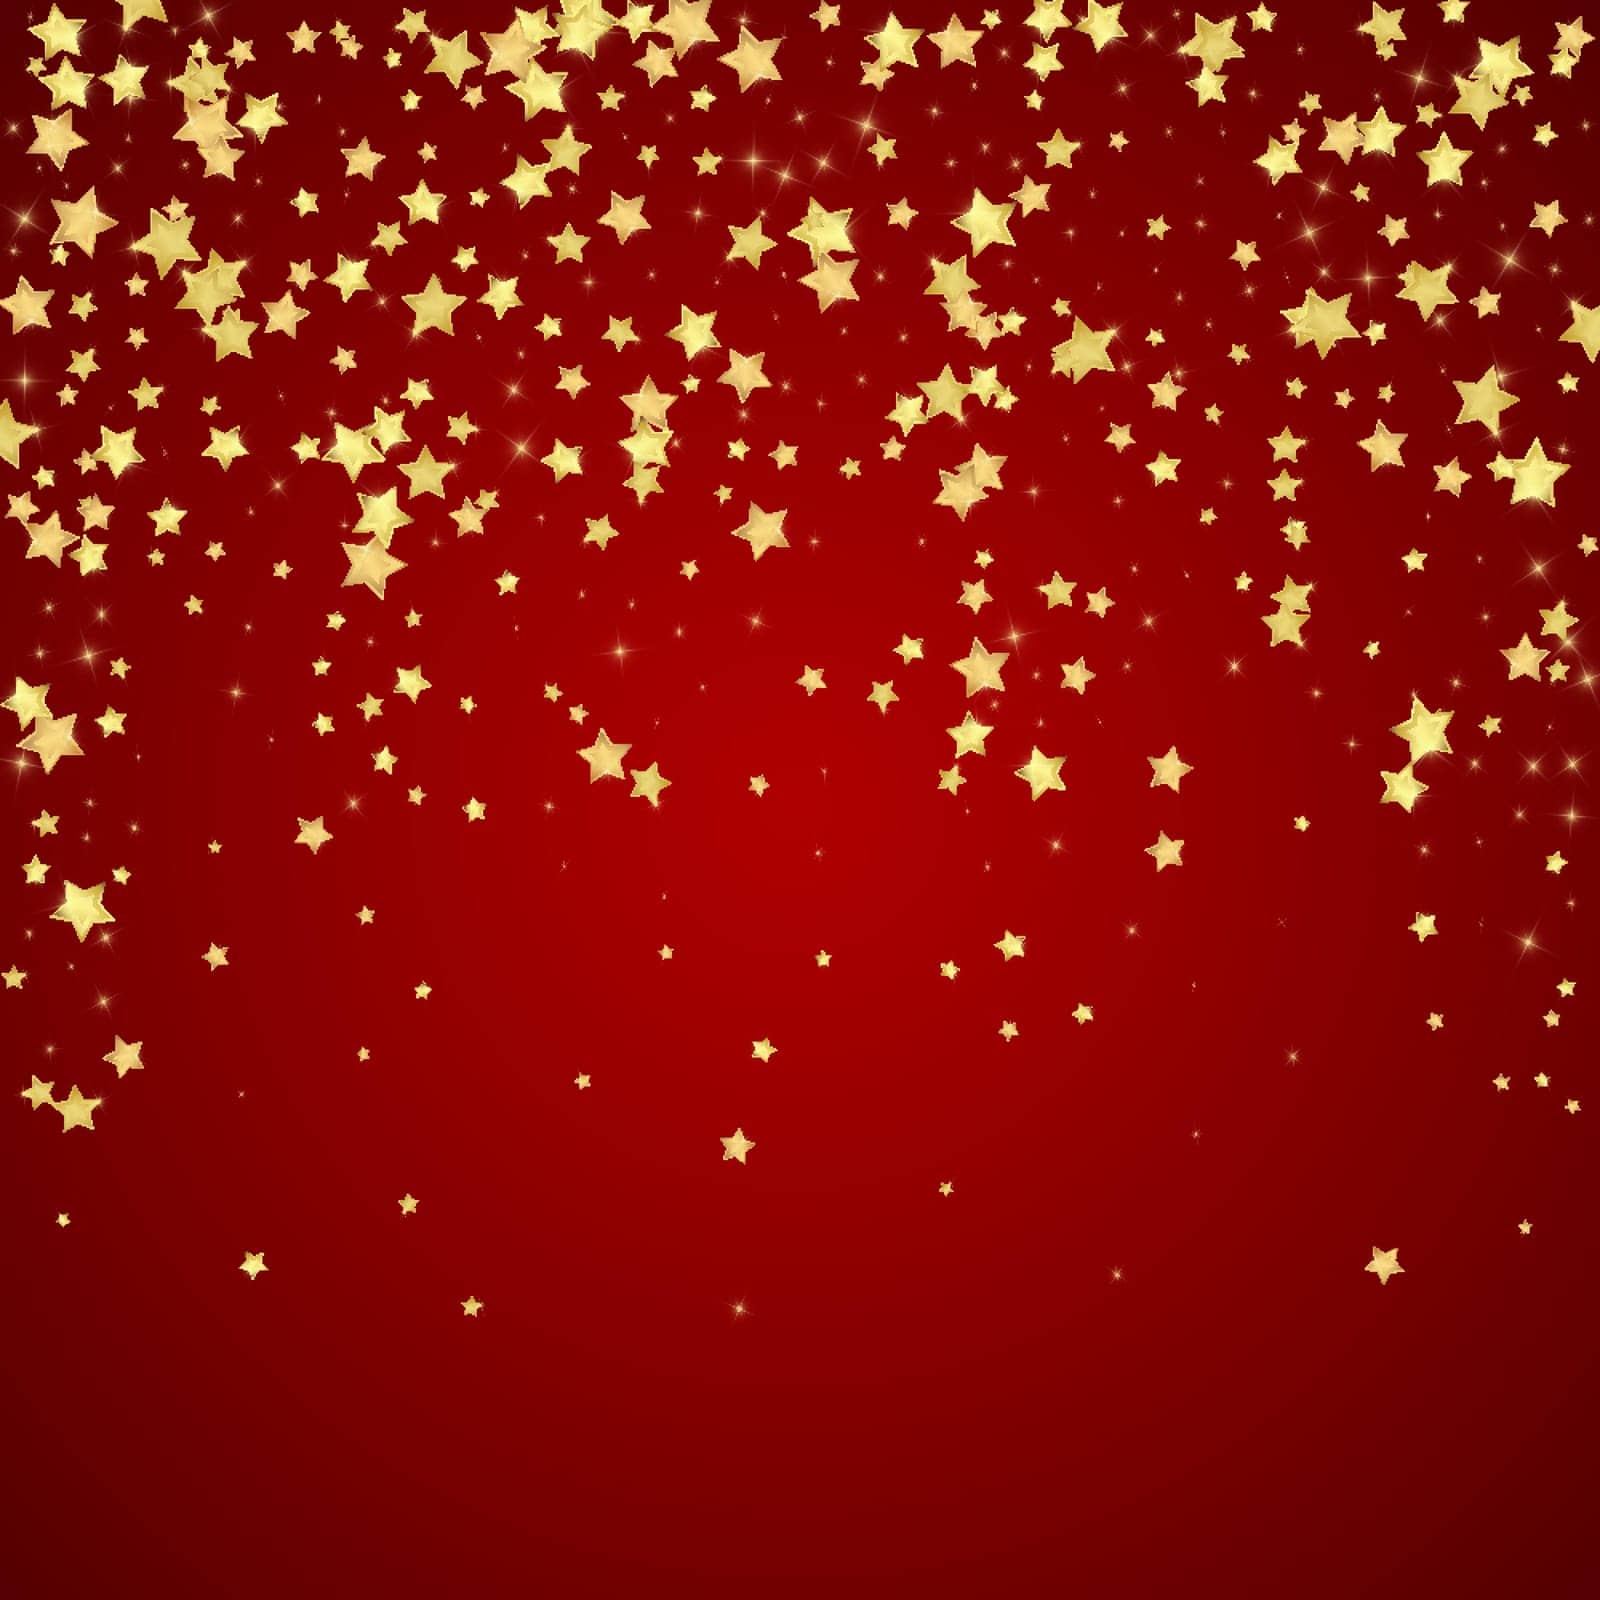 Magic stars vector overlay. Gold stars scattered around randomly, falling down, floating. Chaotic dreamy childish overlay template. Magical cartoon night sky on red background.